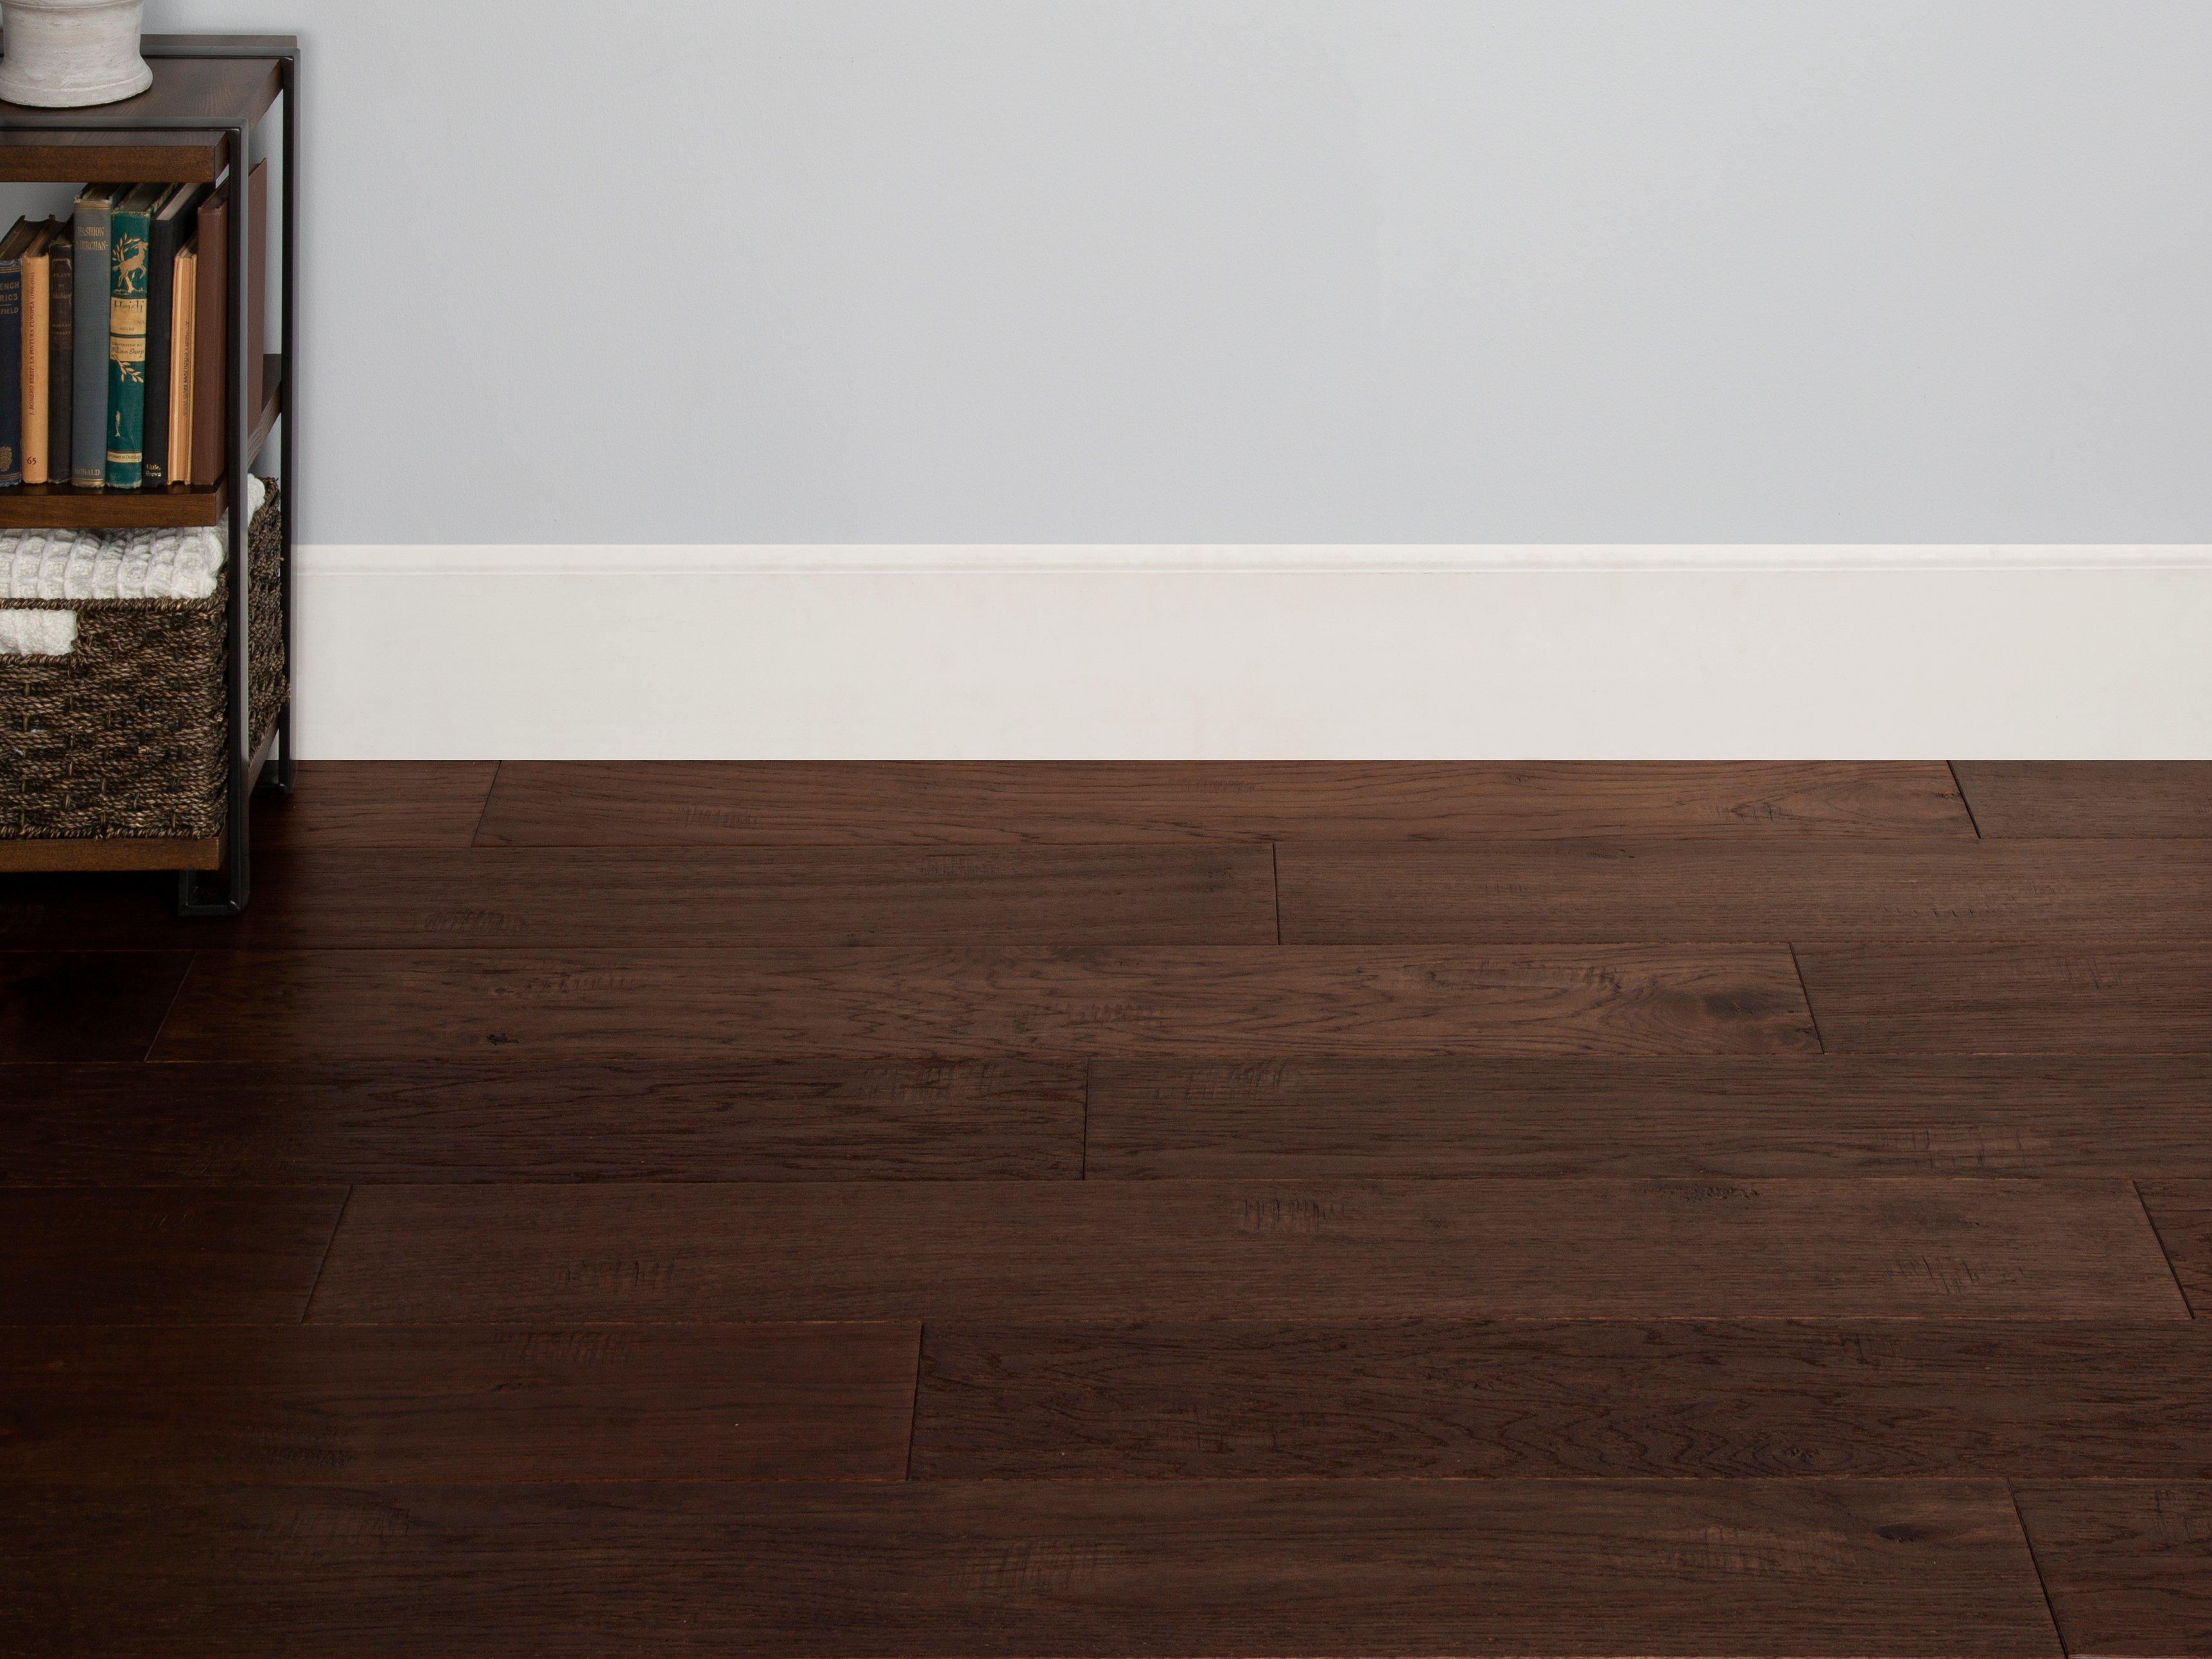 Hickory Salso Hand Scraped Water Resistant Engineered Hardwood